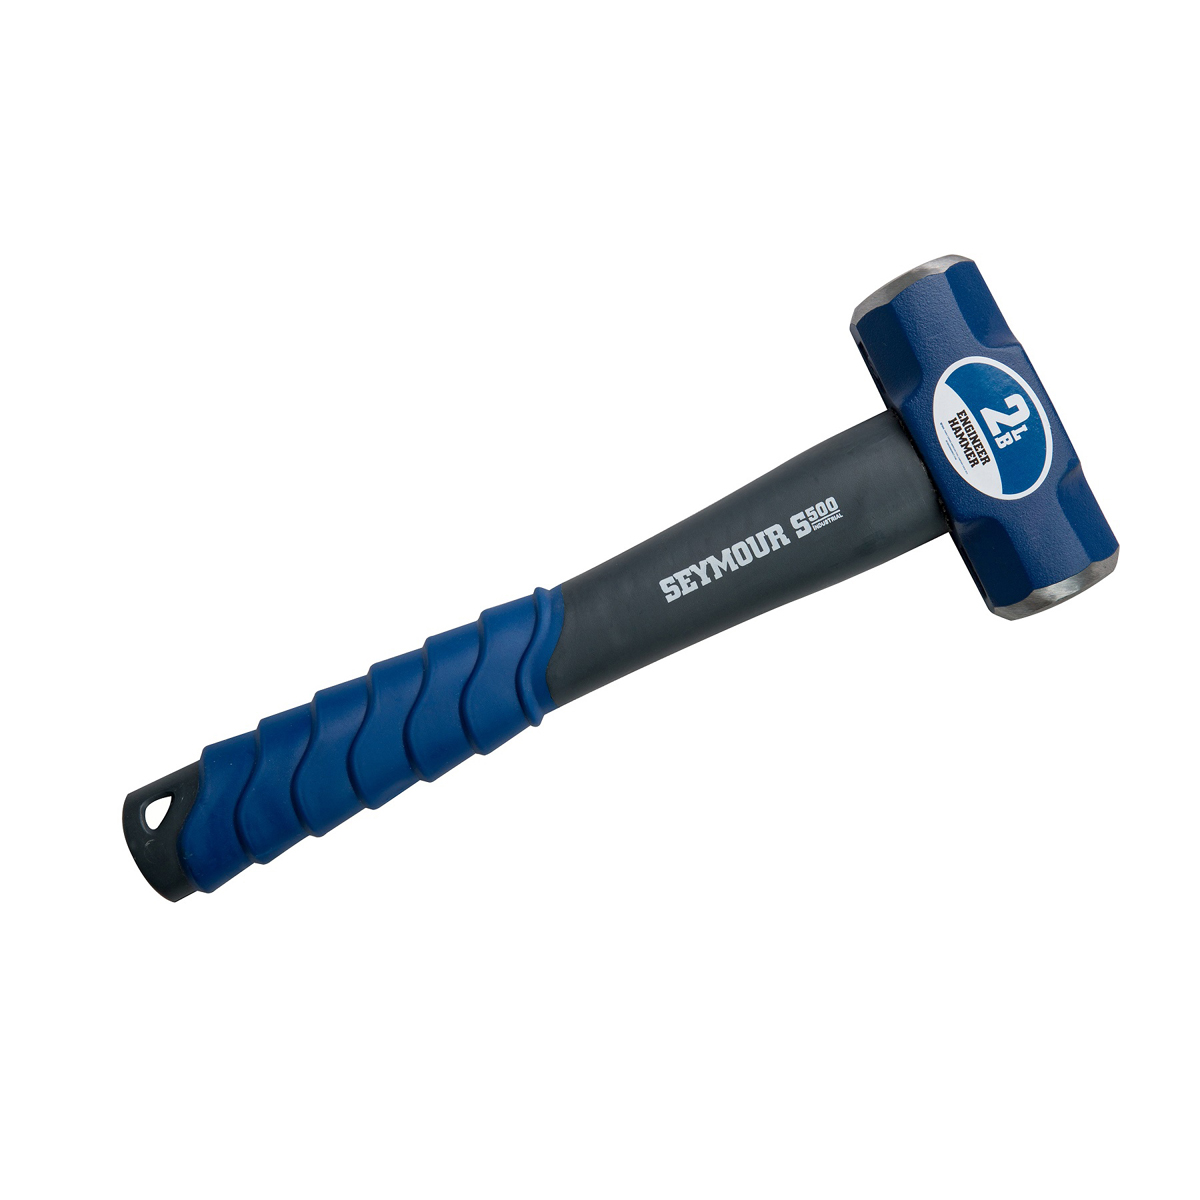 Details about   Magnetic Hammer W/ Mini Holder Slip Resistant Handle Heavy Duty Angled Shaft 